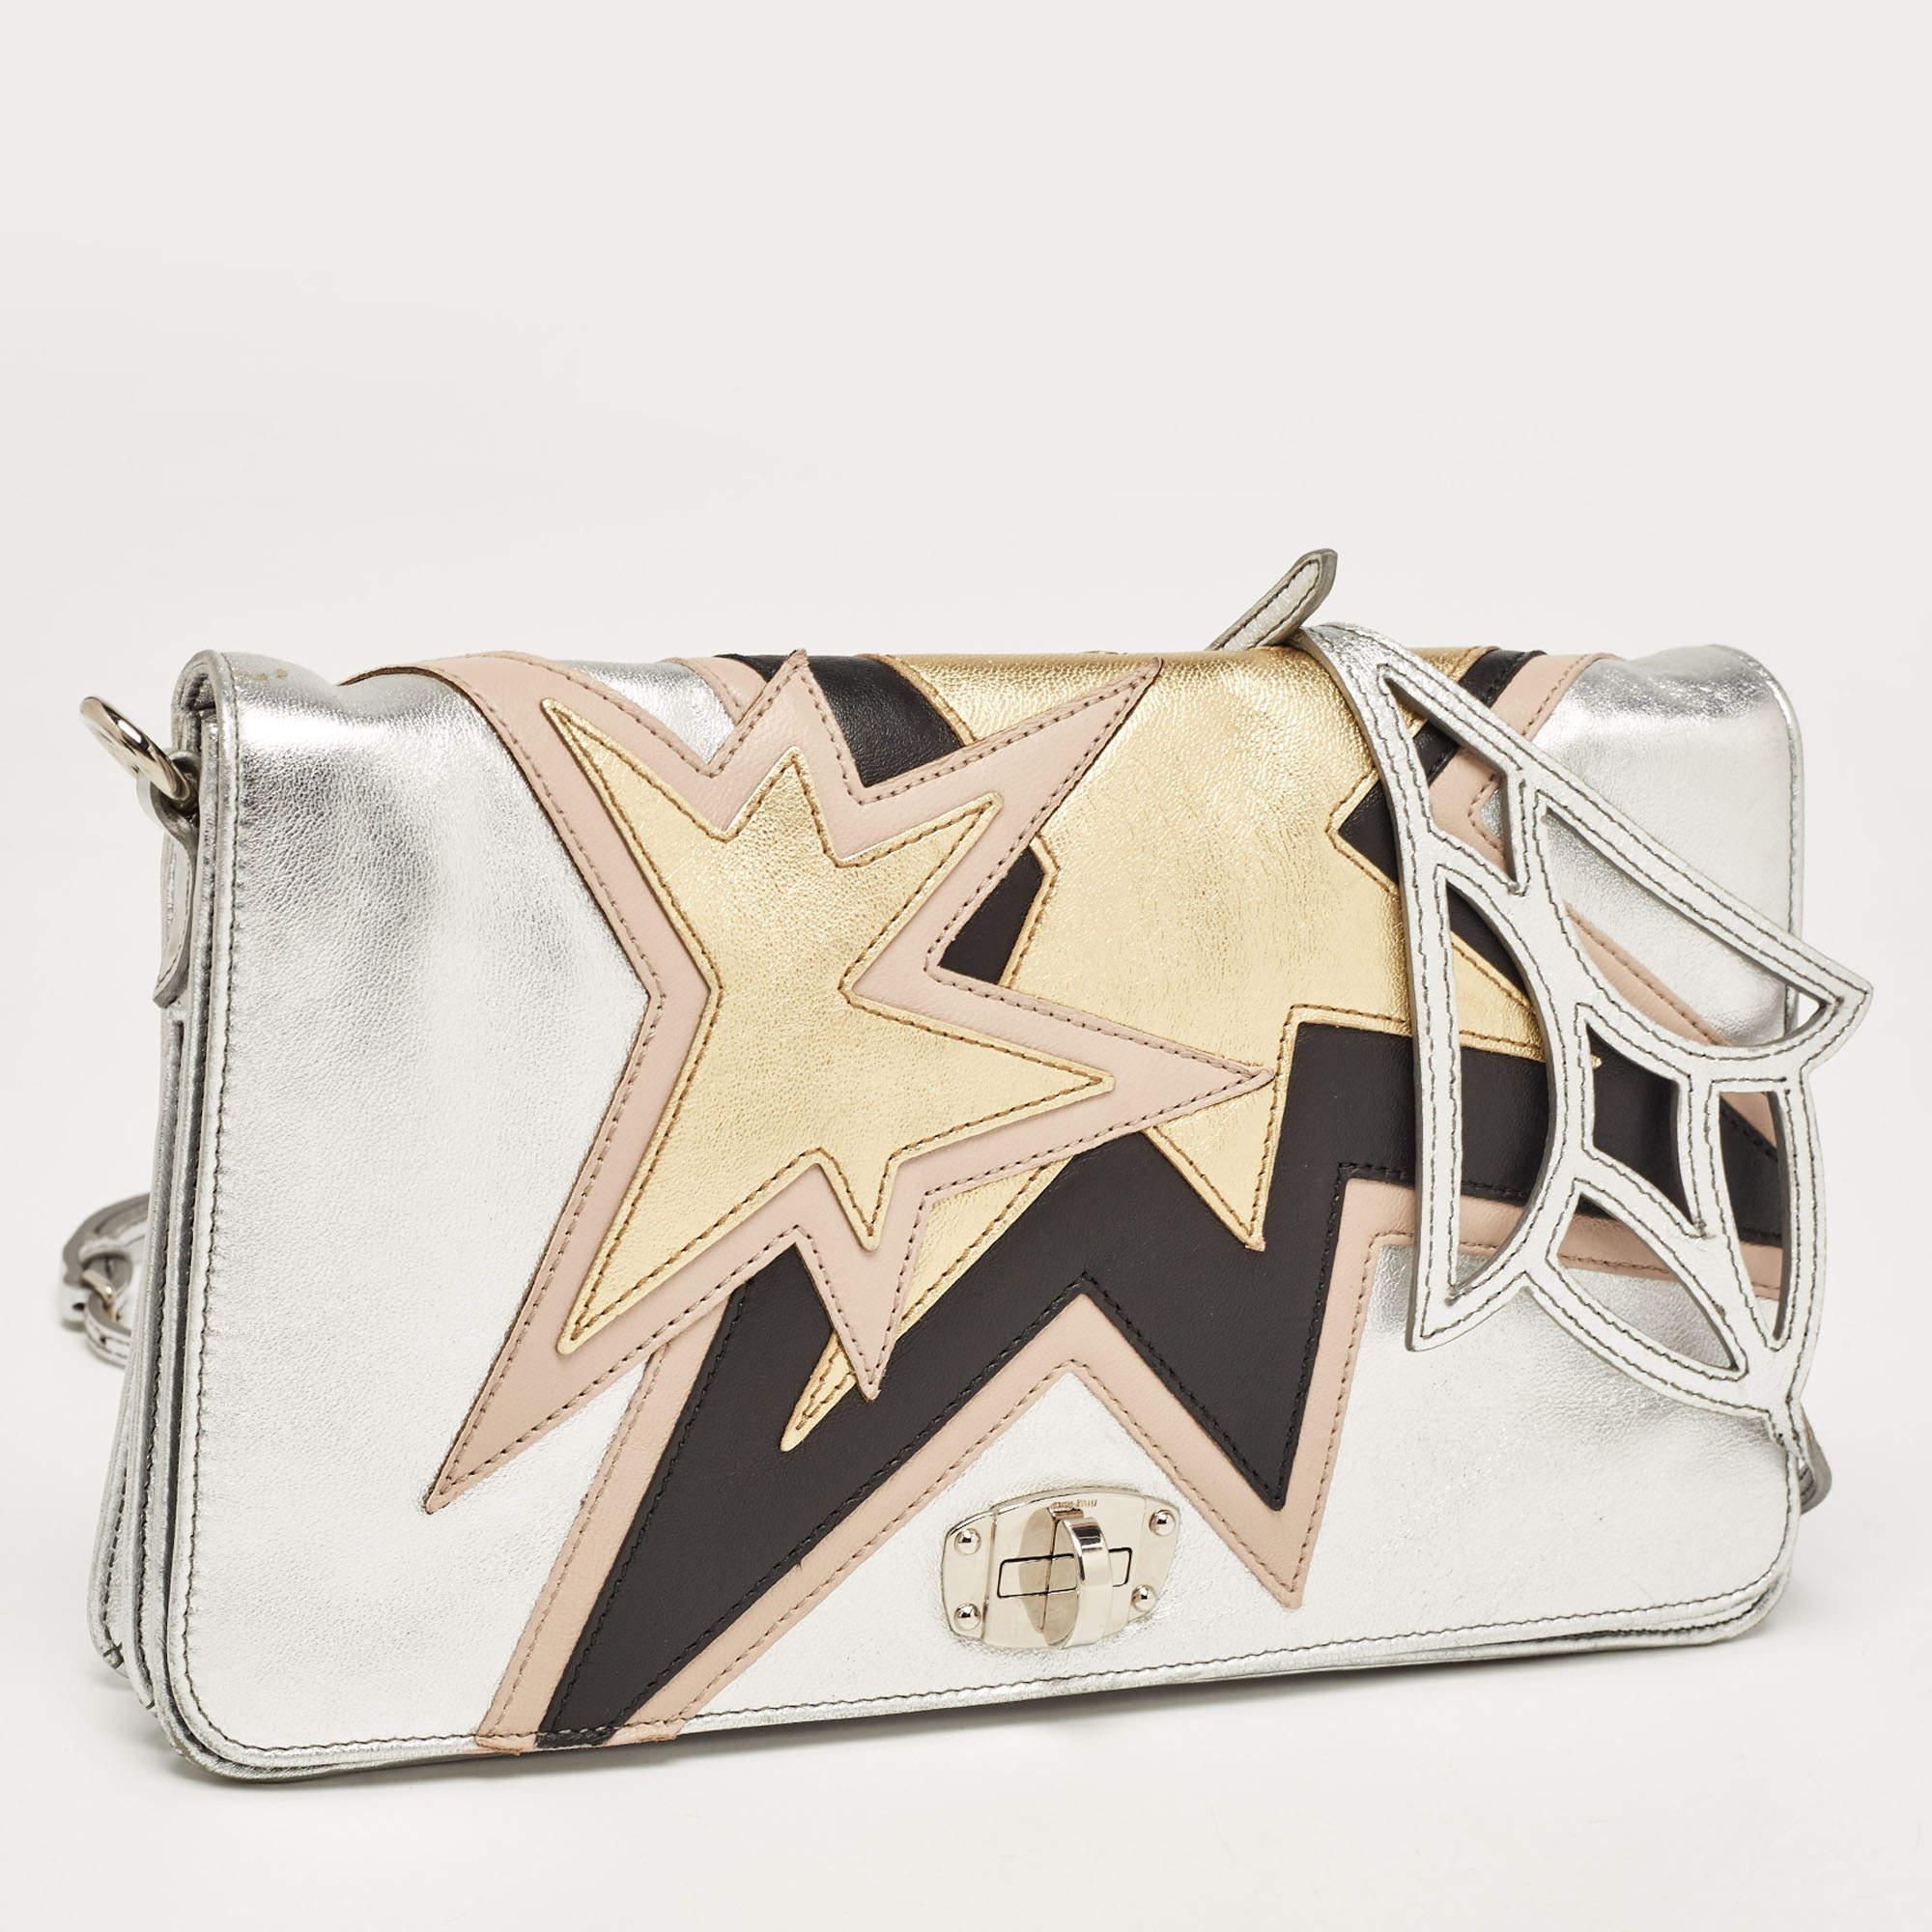 Be a star and steal the show with this stylish and glam shoulder bag. This is a Miu Miu diagonal shoulder bag with a distinctive strap. It has a twist-lock in the front and a spacious compartment space within for your valuables. The creation will go